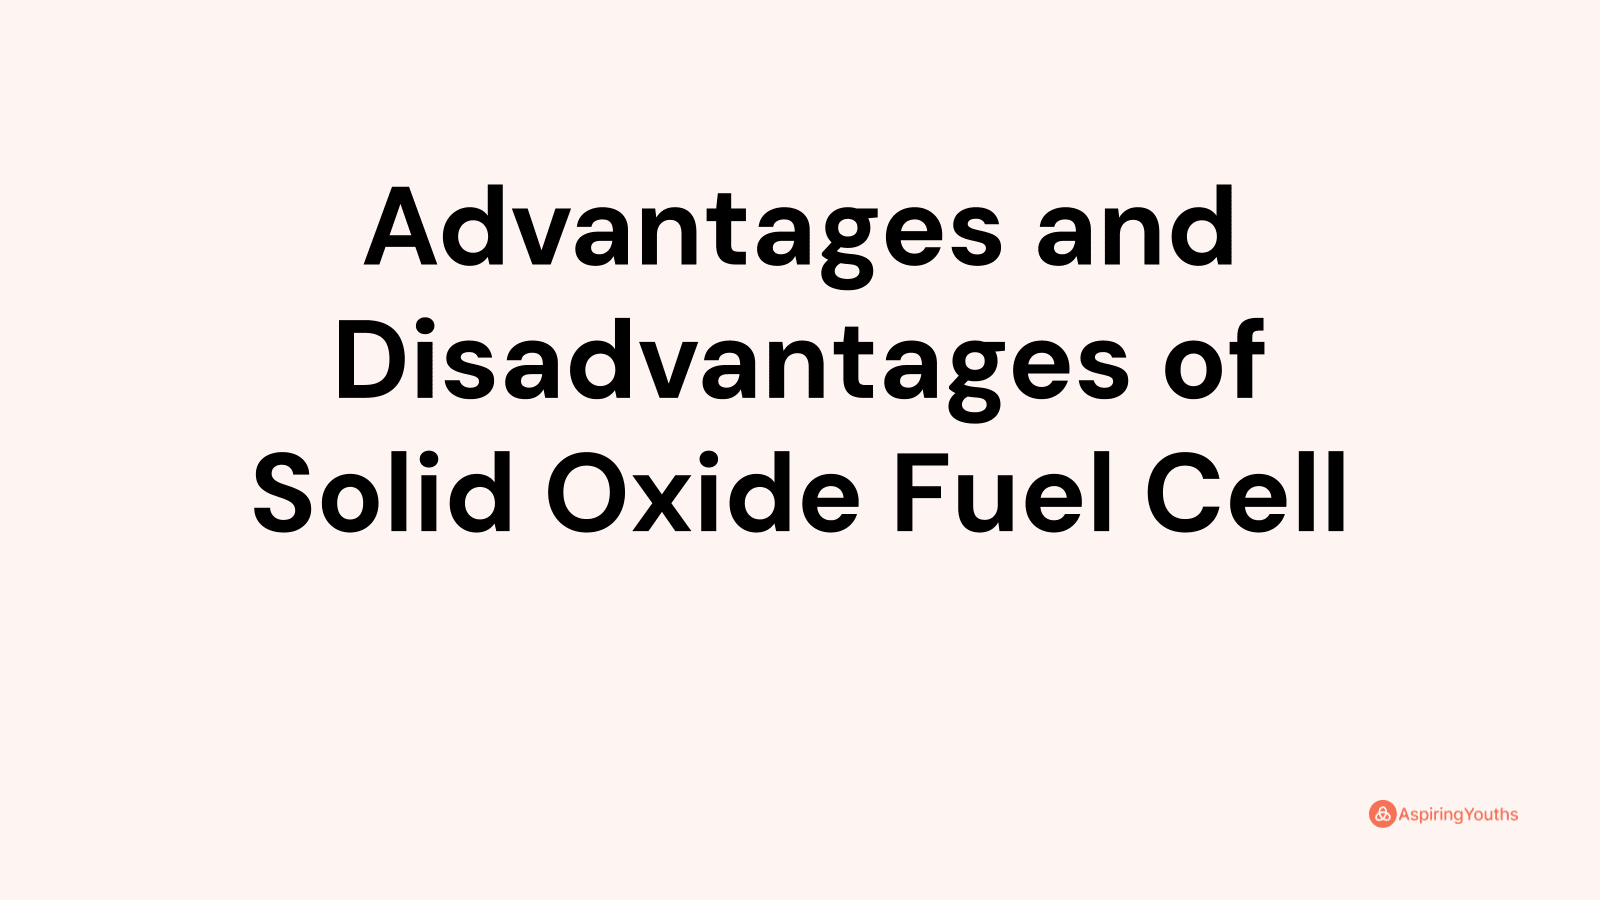 Advantages and disadvantages of Solid Oxide Fuel Cell